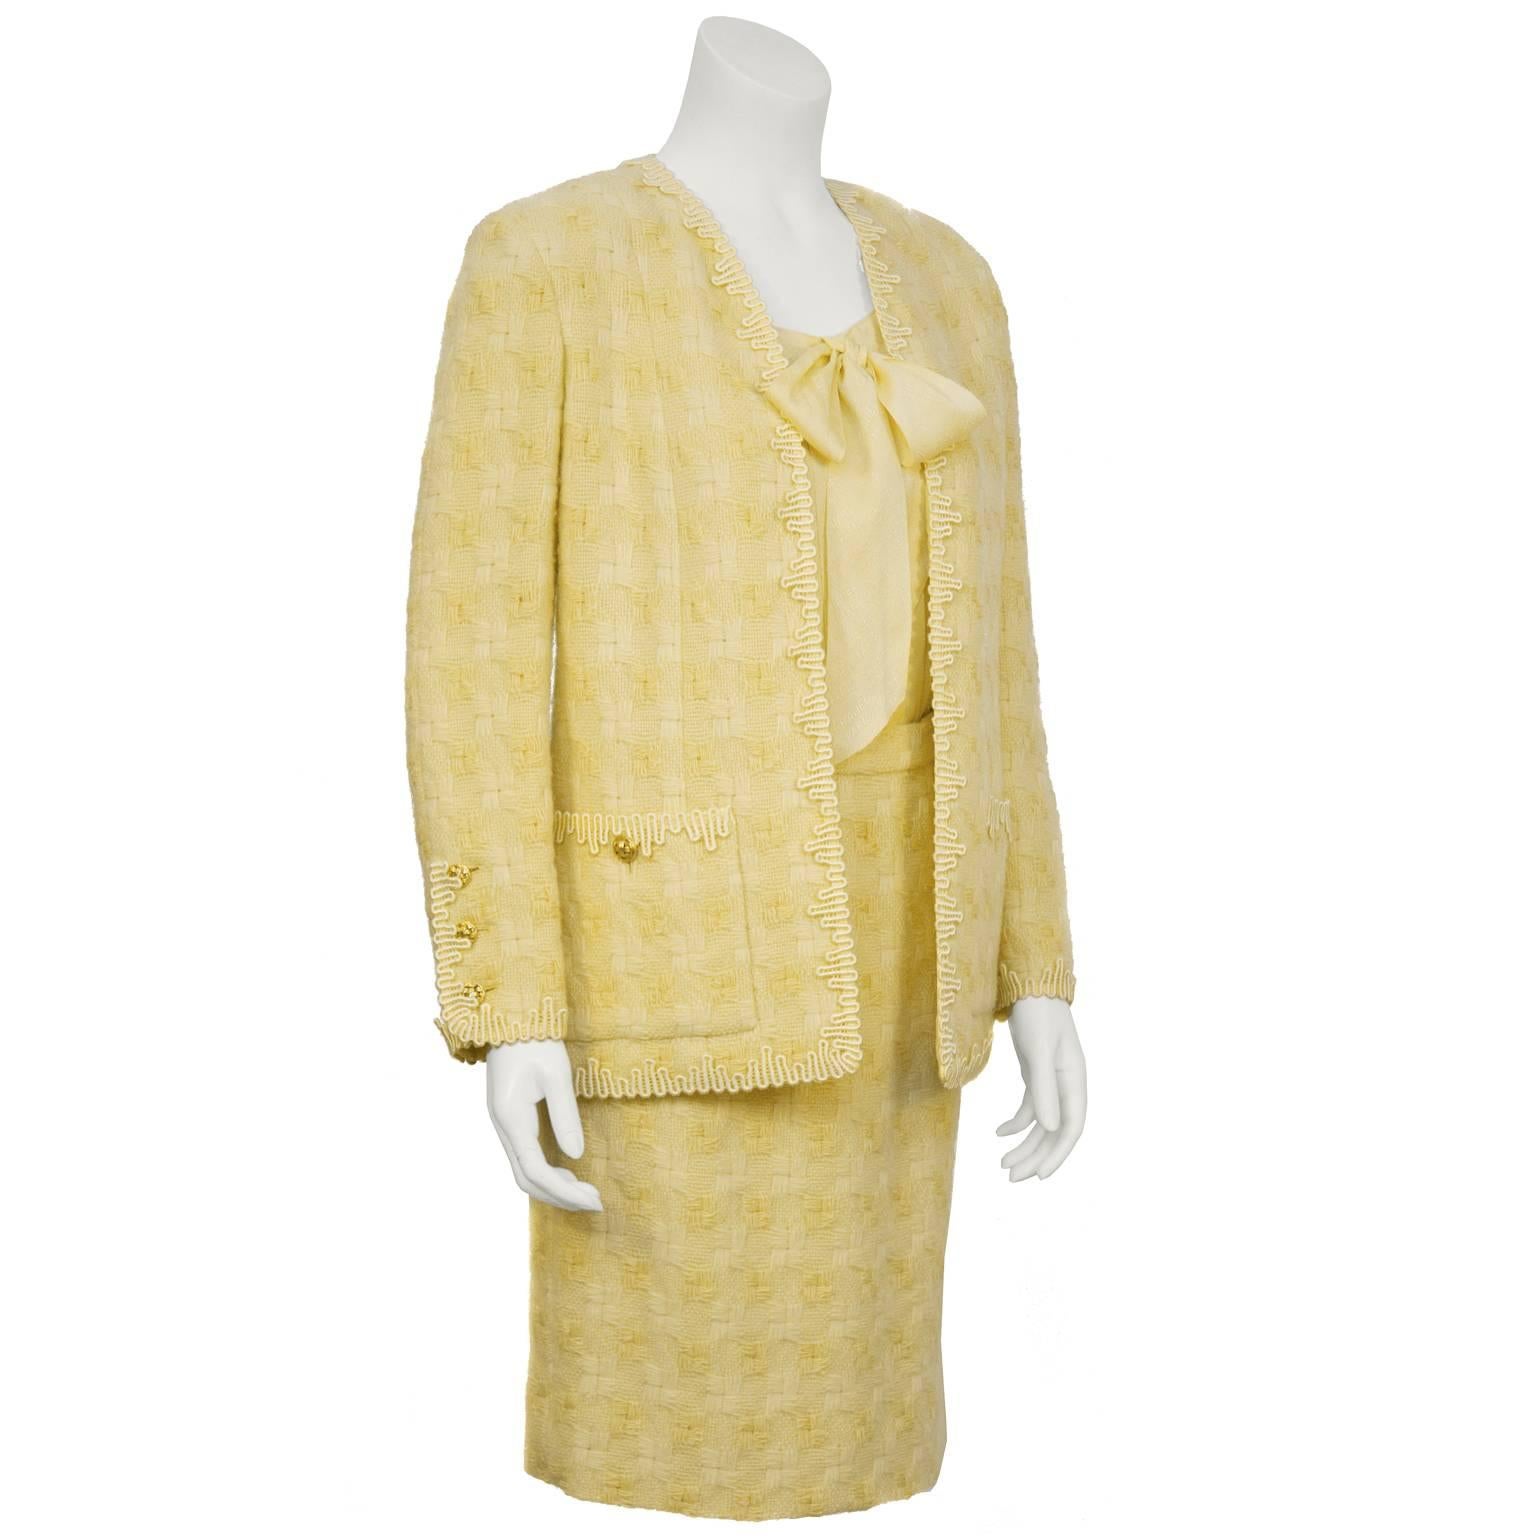 Chanel 1970's butter yellow woven wool skirt suit. The jacket features rickrack trim along the pockets, cuffs and edges and is finished with gold basket weave detail buttons. The skirt fastens up the back with a zipper and snap. The matching yellow